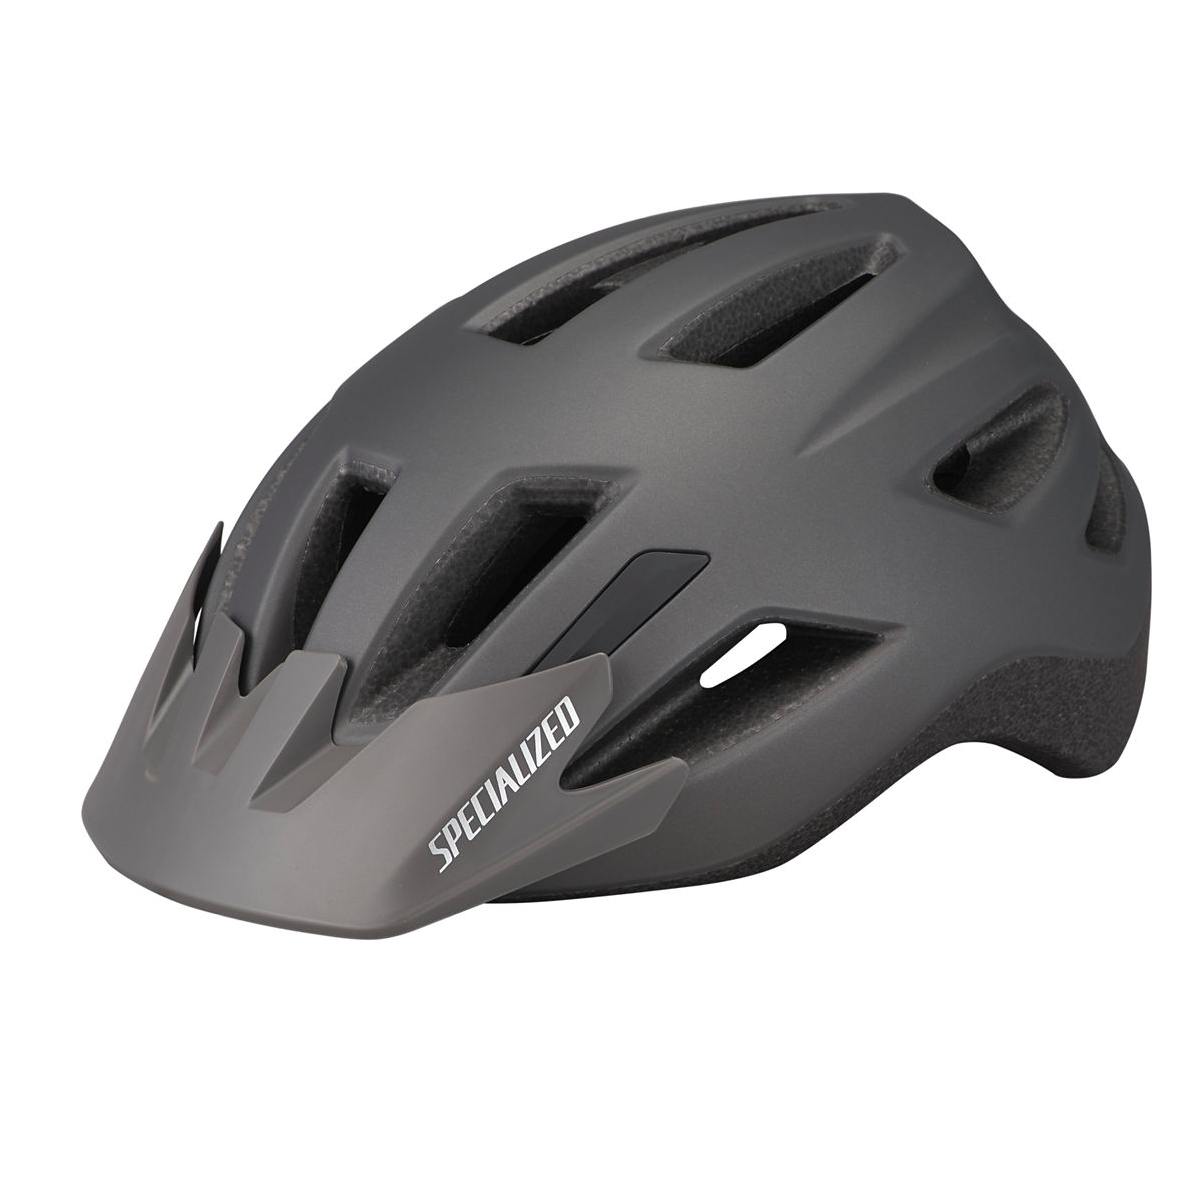 CASQUE SPECIALIZED SHUFFLE YOUTH GRIS FONCE